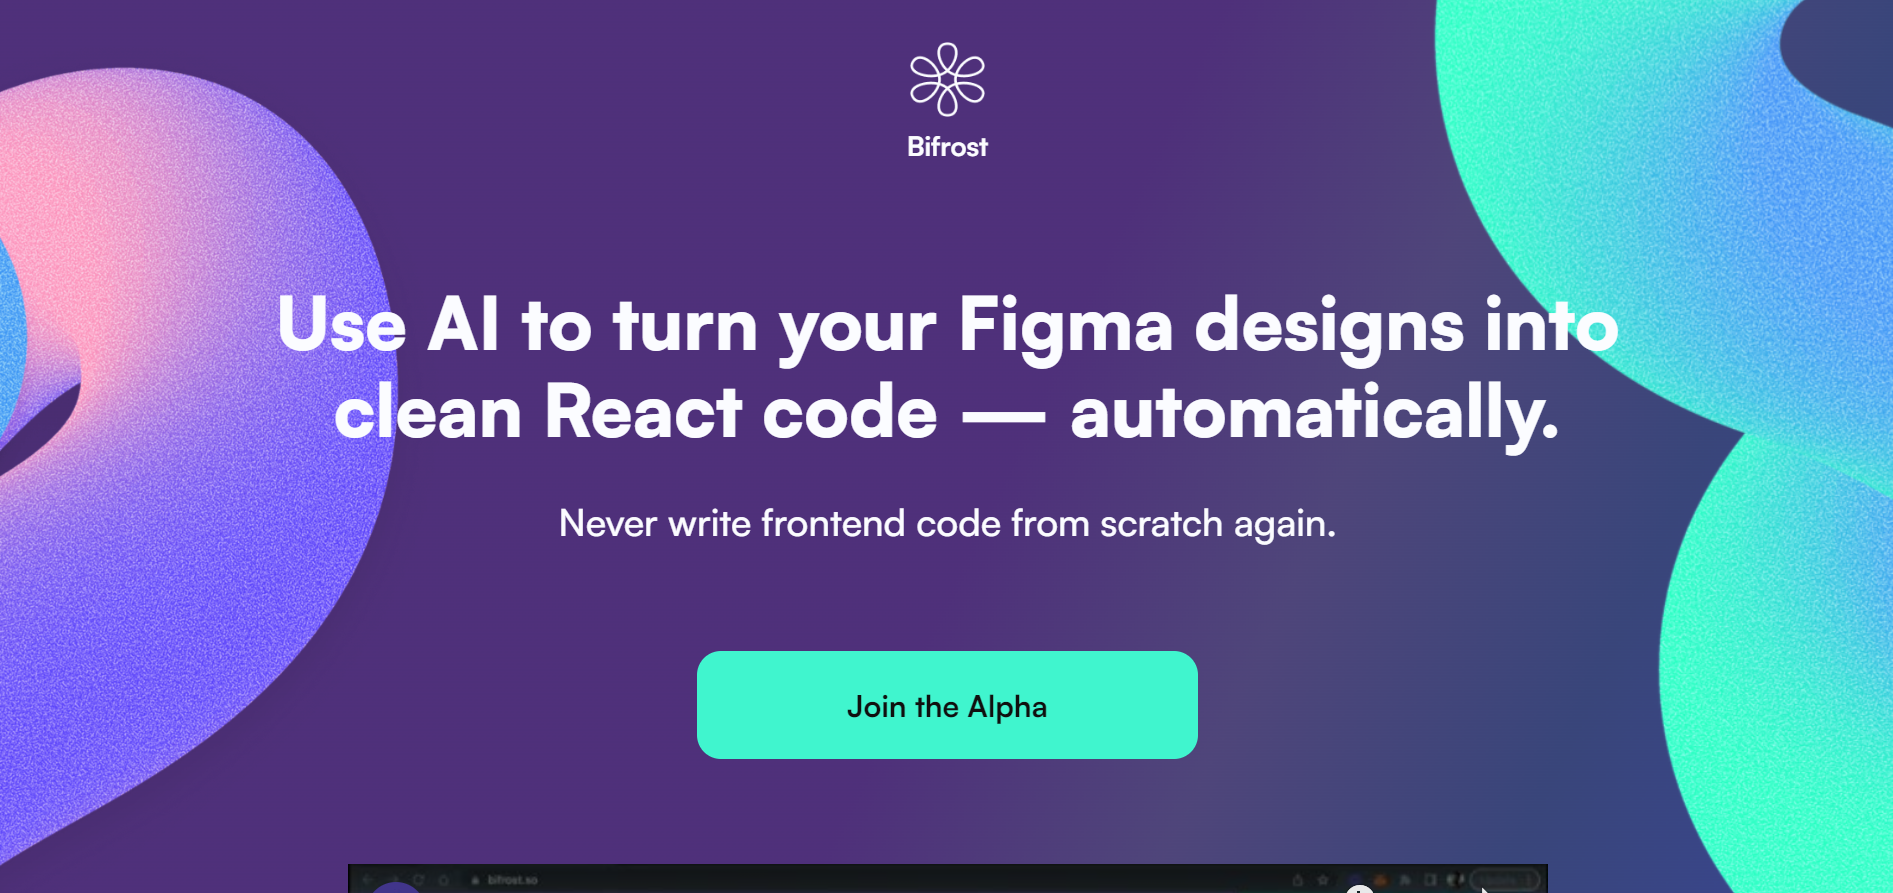 Bifrost.so: The Ultimate Tool for Designers and Engineers Alike!